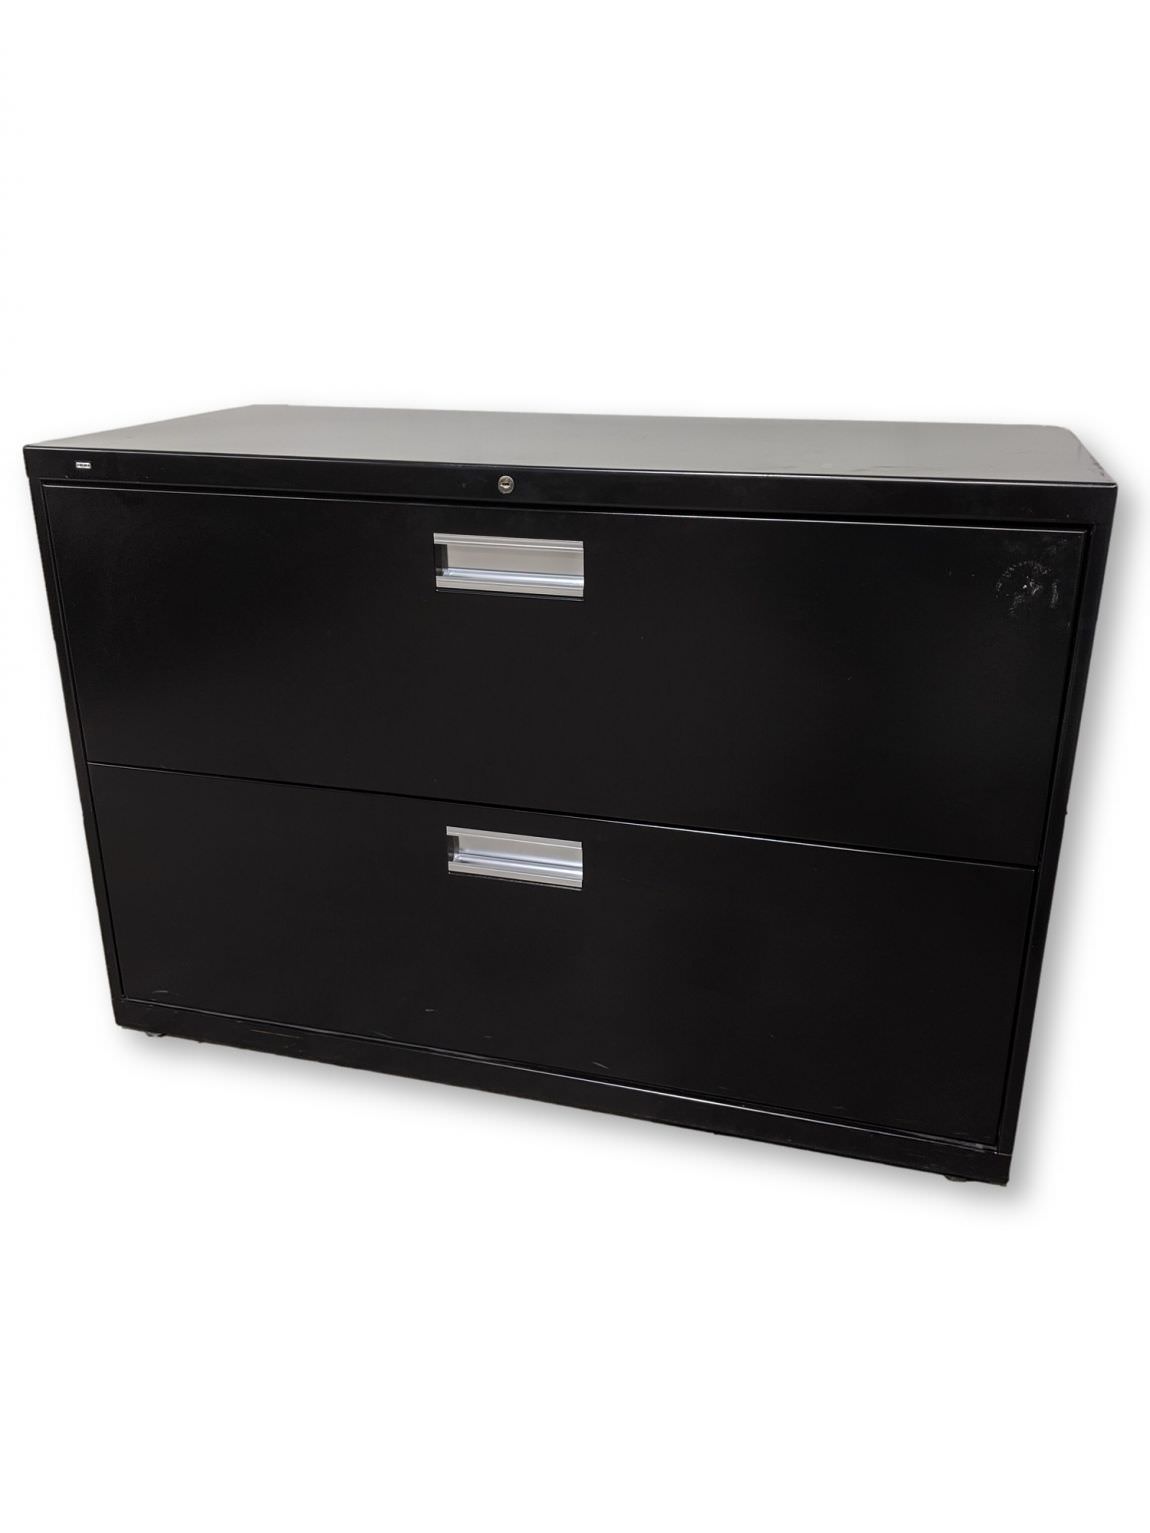 Black Hon 2 Drawer Lateral Filing Cabinet – 41.75 Inch Wide 41.75